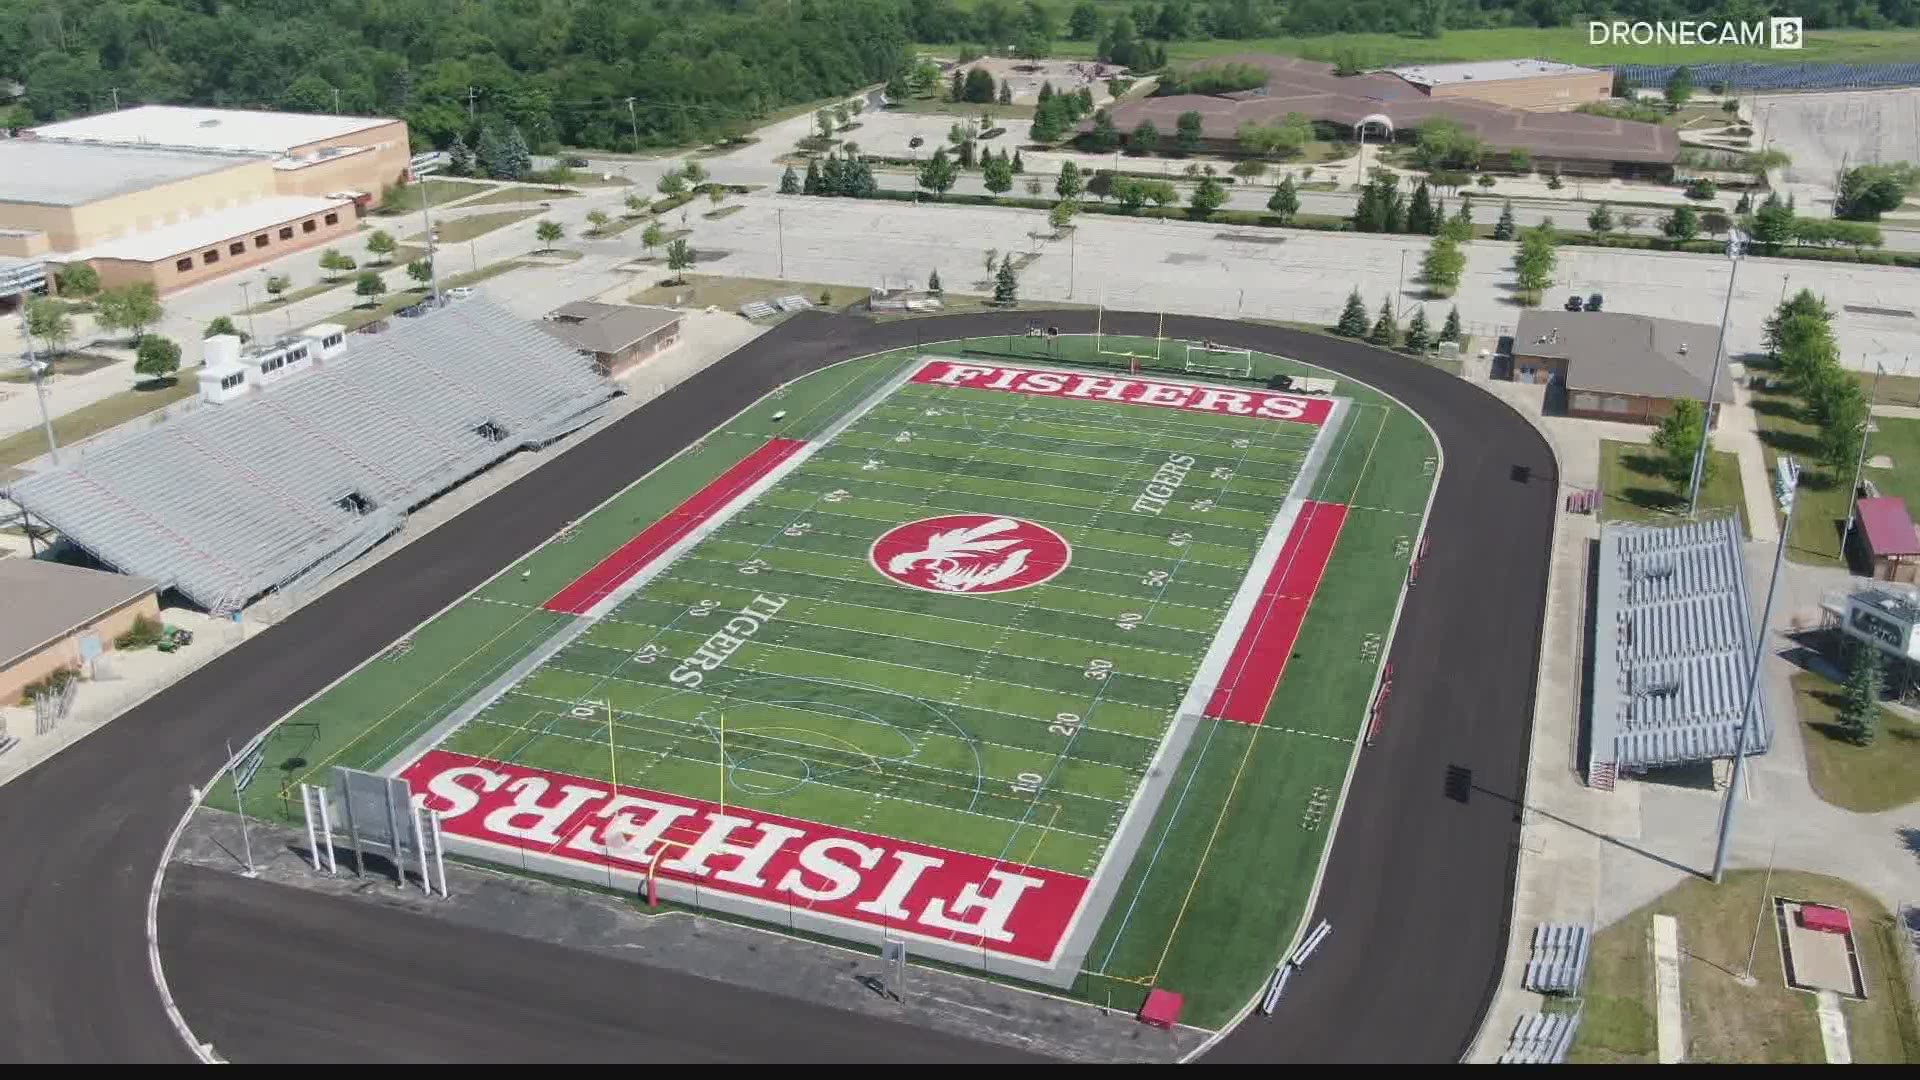 Fishers High School has canceled football practice for the rest of the week after a player tested positive for COVID-19.